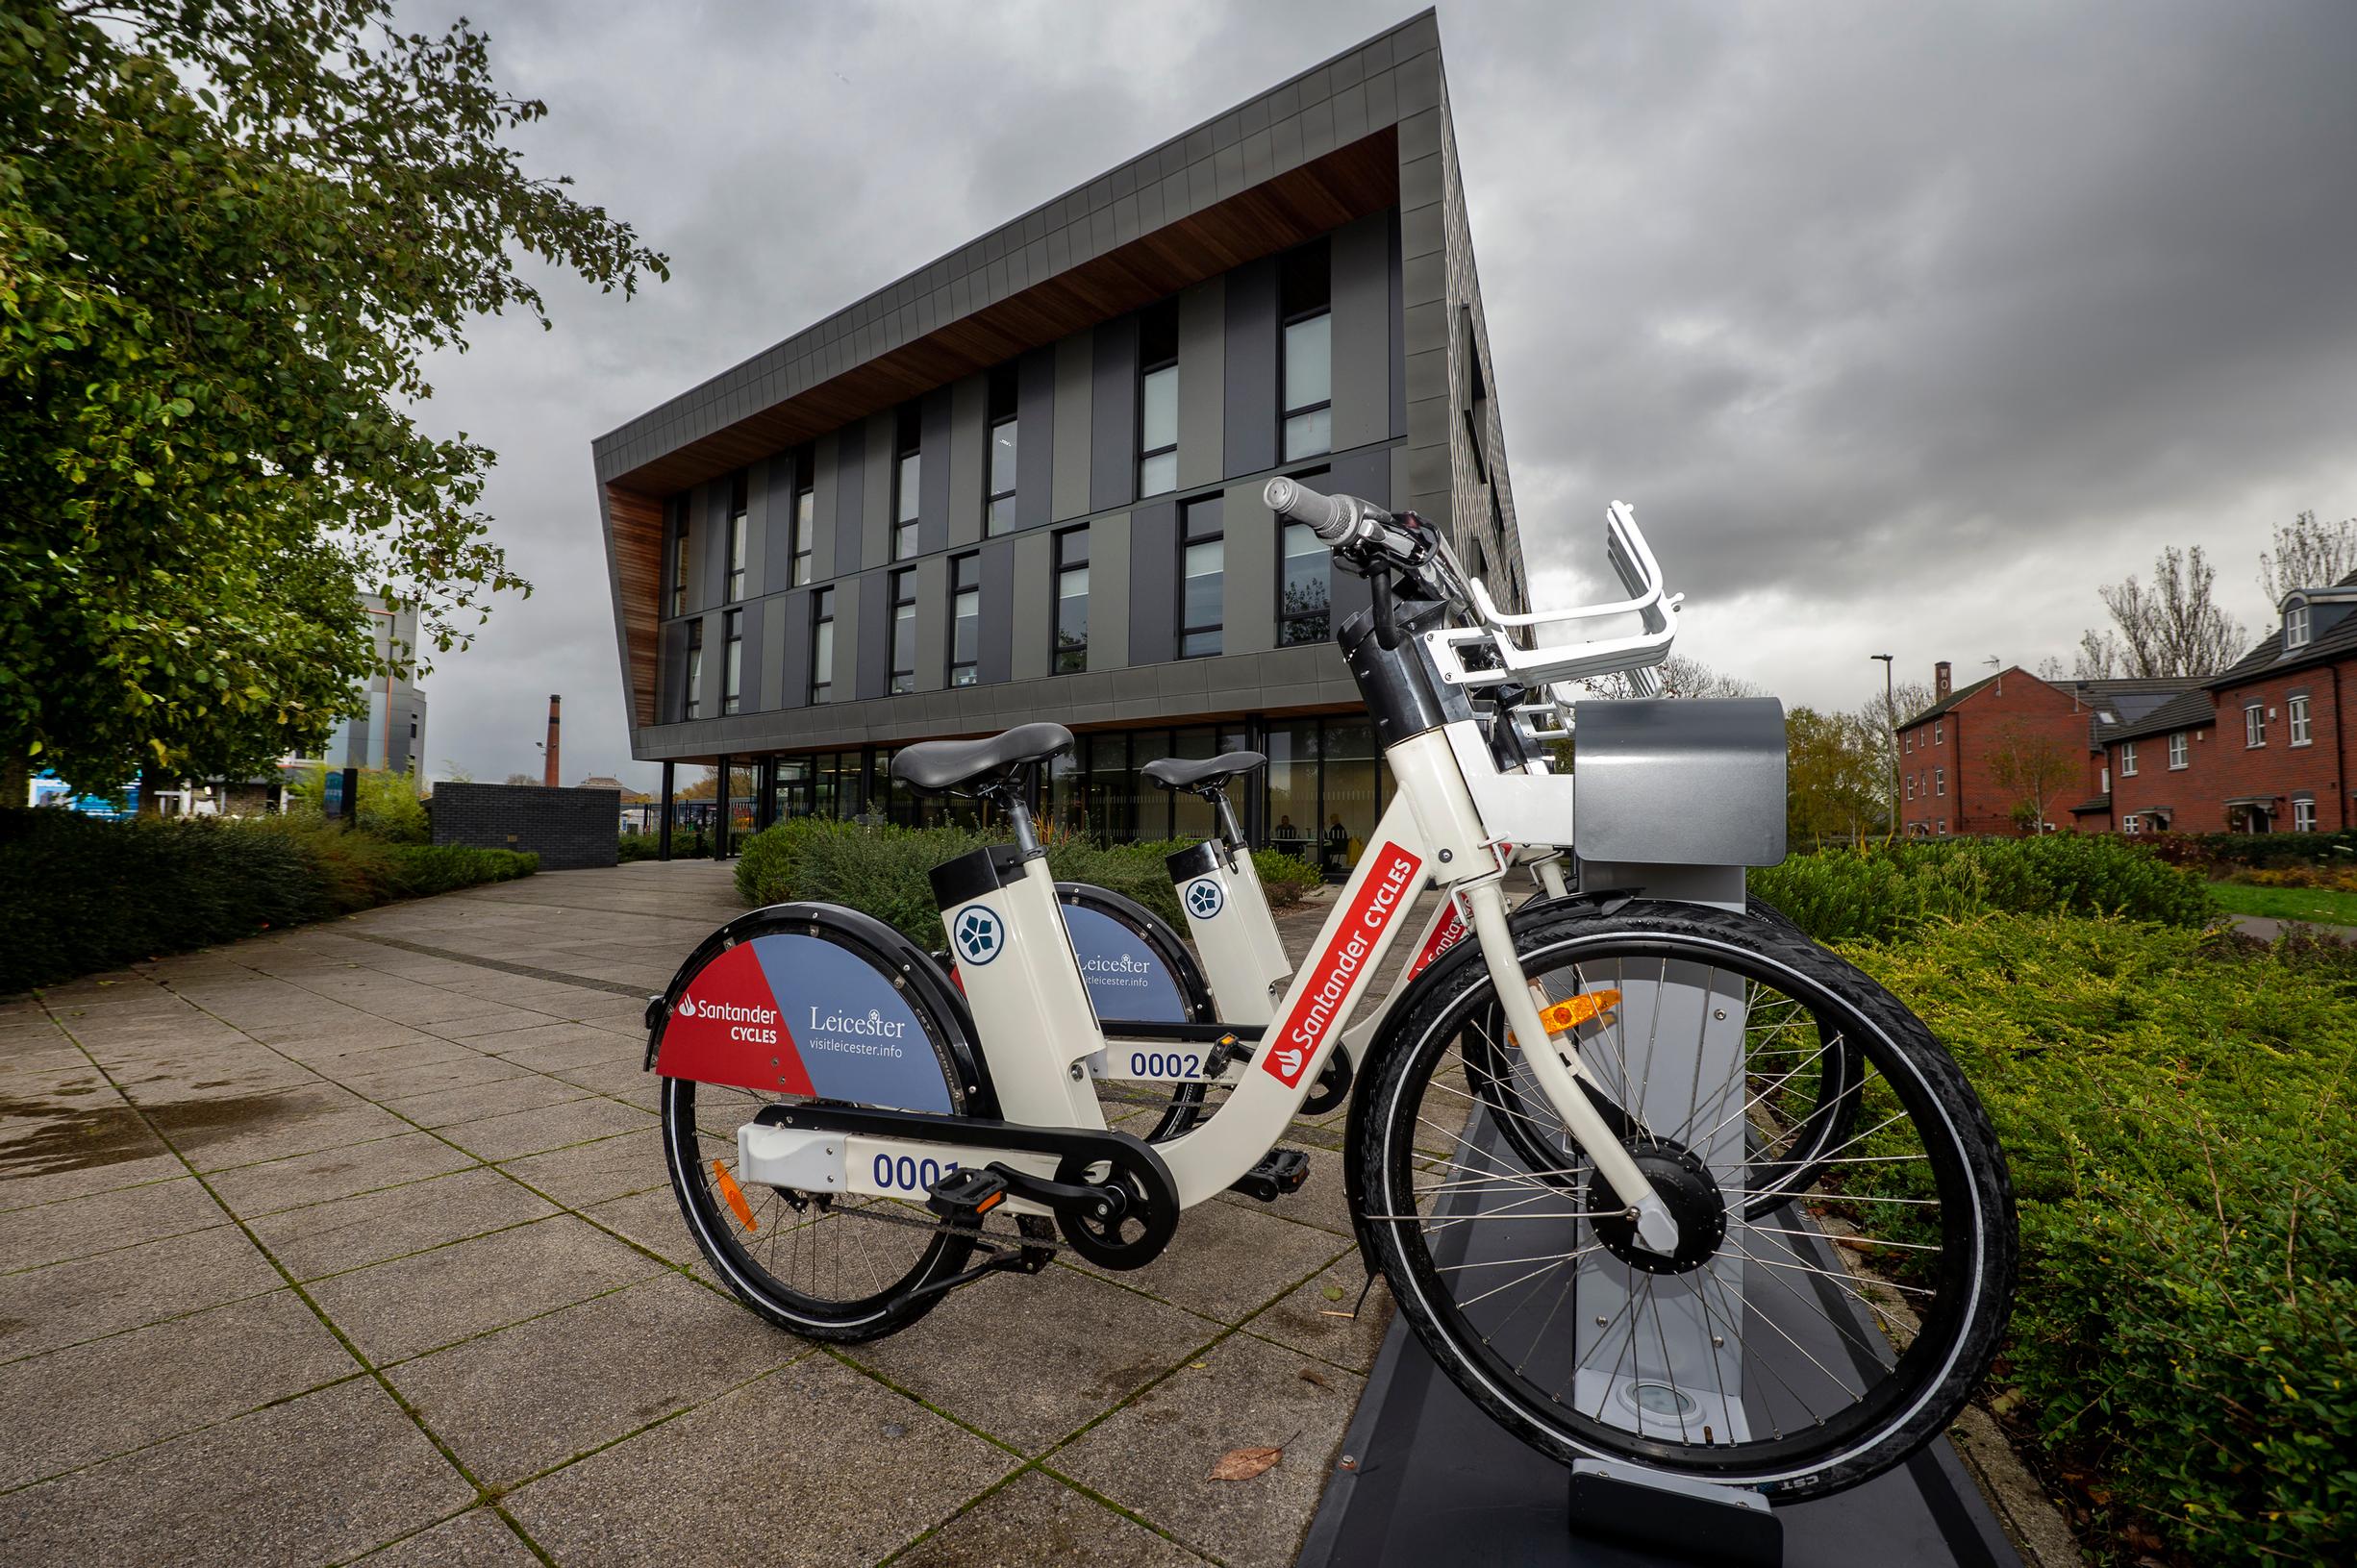 The £600,000 project is being funded by a partnership made up of Leicester City Council - following the council’s successful bid to the Department for Transport’s Transforming Cities fund – with sponsorship from Santander UK and additional investment from the operator, Ride On, and their delivery partner Enzen Global